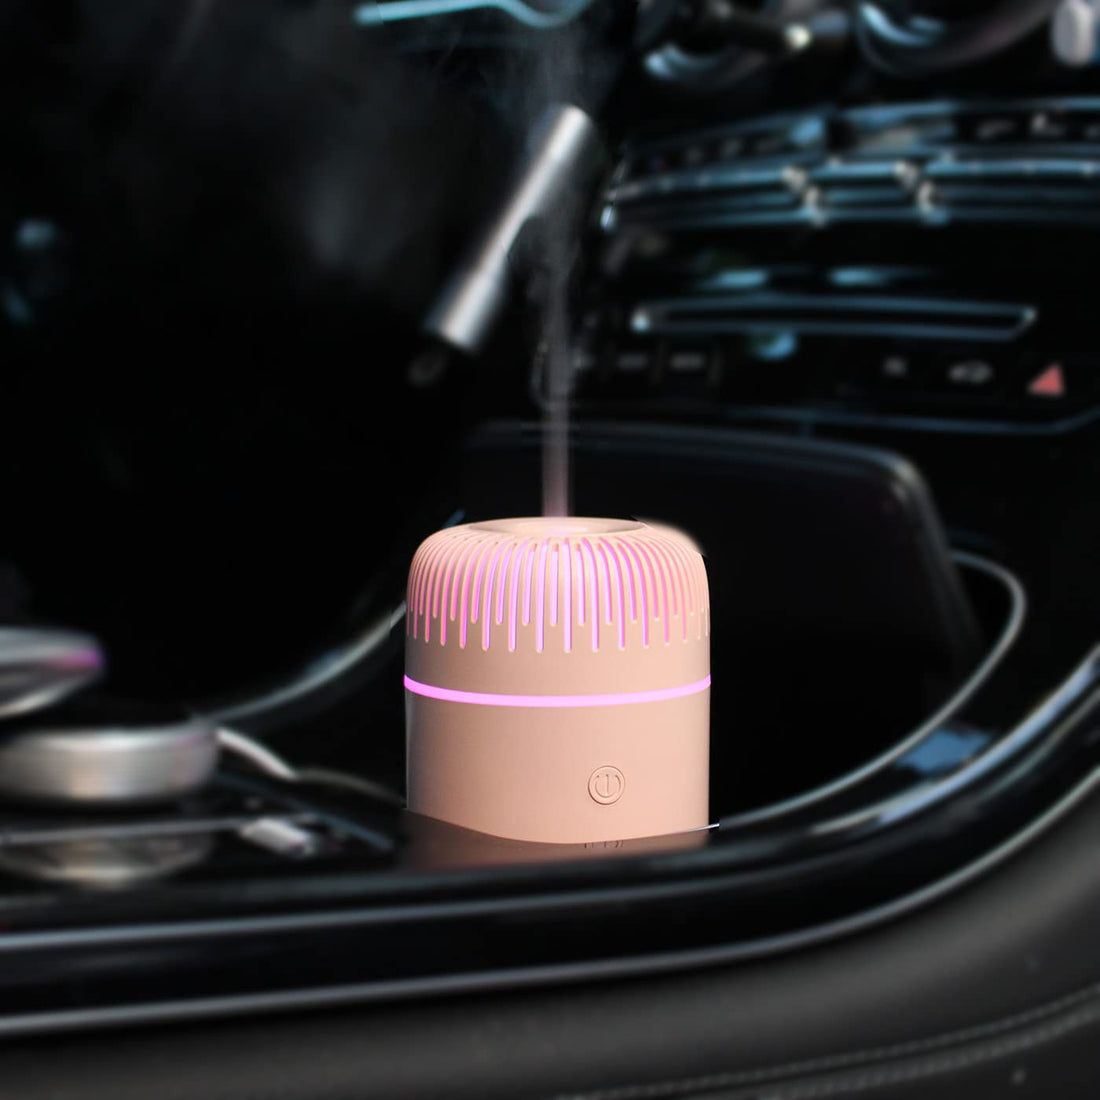 UNEE Car Aroma Diffuser, 100ml Sunshine Humidifier Aromatherapy Essential Oil Diffuser USB Cool Mist Mini Portable Diffuser for Car,Home,Office,Bedroom(Pink)